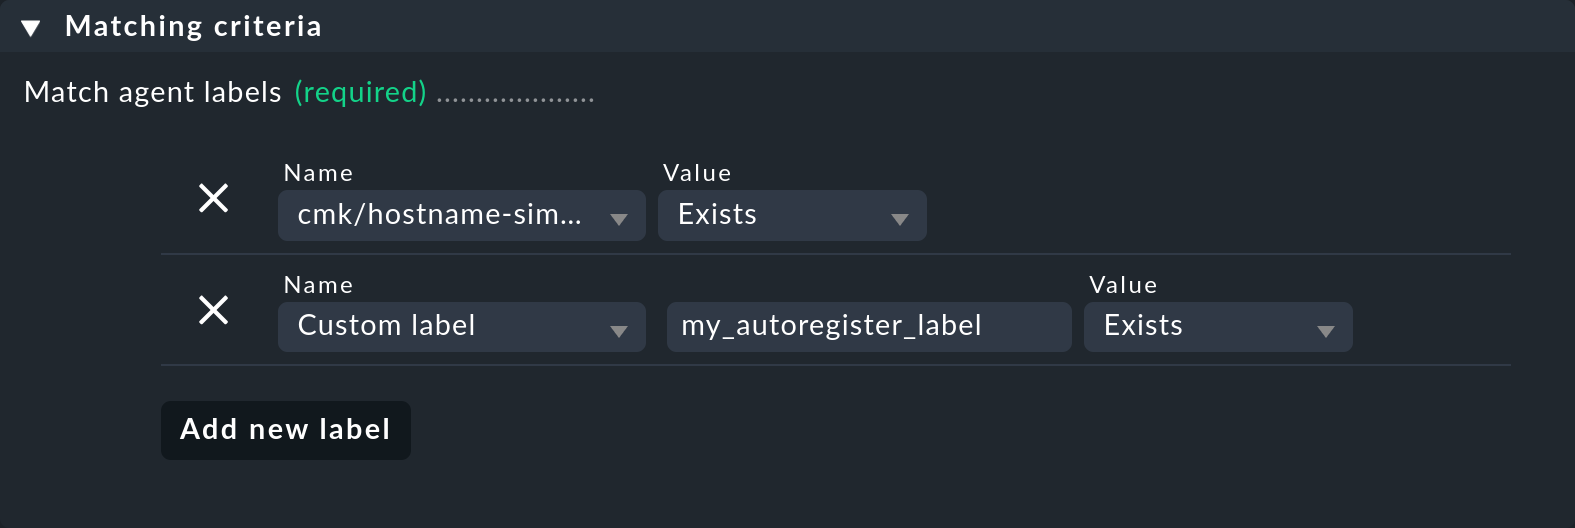 Auto-registration rule specifying the allowed labels.